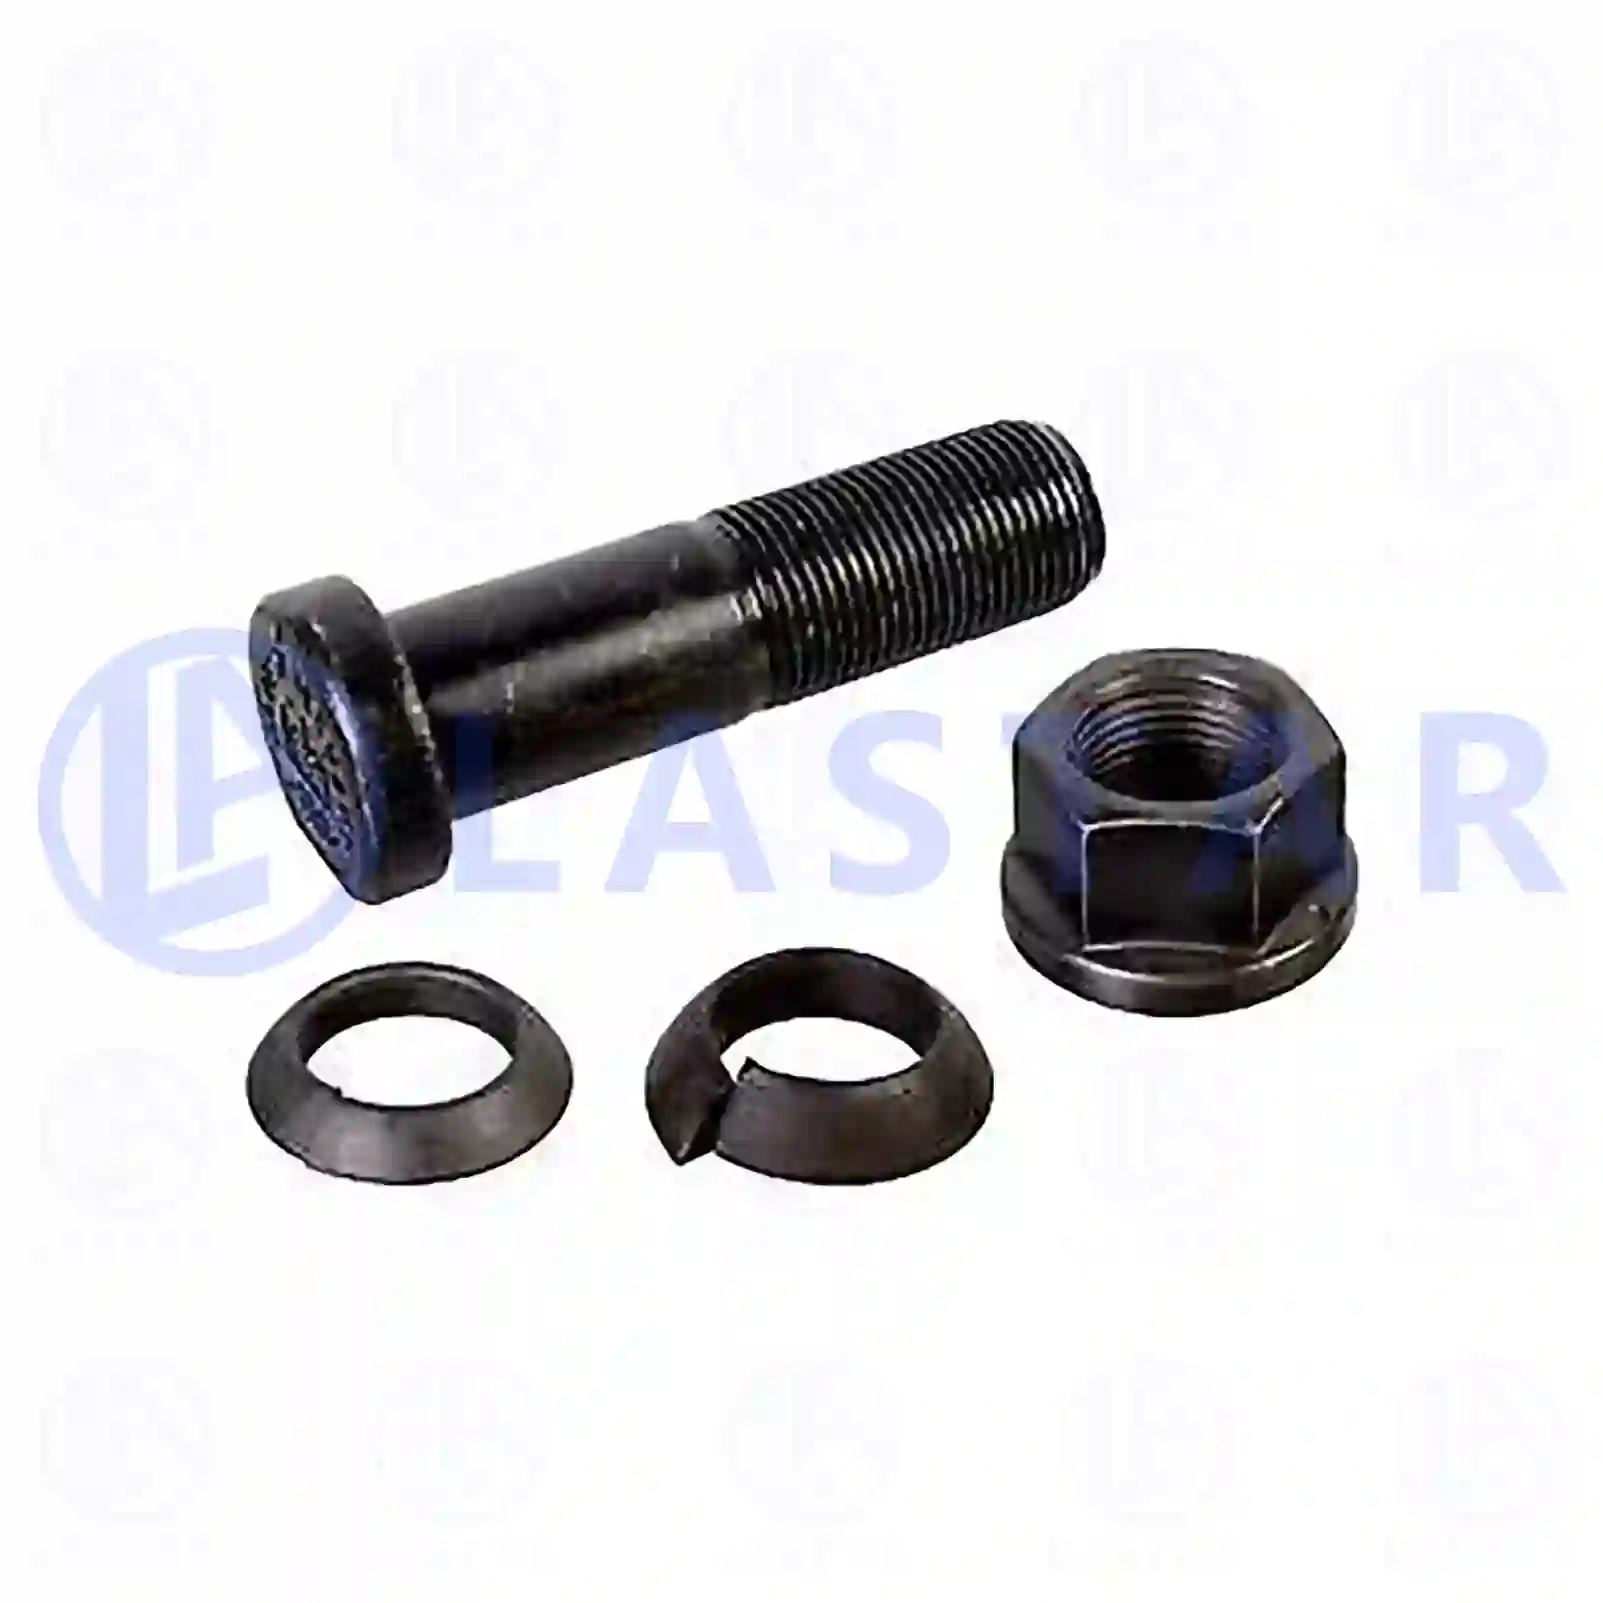 Wheel bolt, complete, 77726443, 3524020171S1, , , , ||  77726443 Lastar Spare Part | Truck Spare Parts, Auotomotive Spare Parts Wheel bolt, complete, 77726443, 3524020171S1, , , , ||  77726443 Lastar Spare Part | Truck Spare Parts, Auotomotive Spare Parts